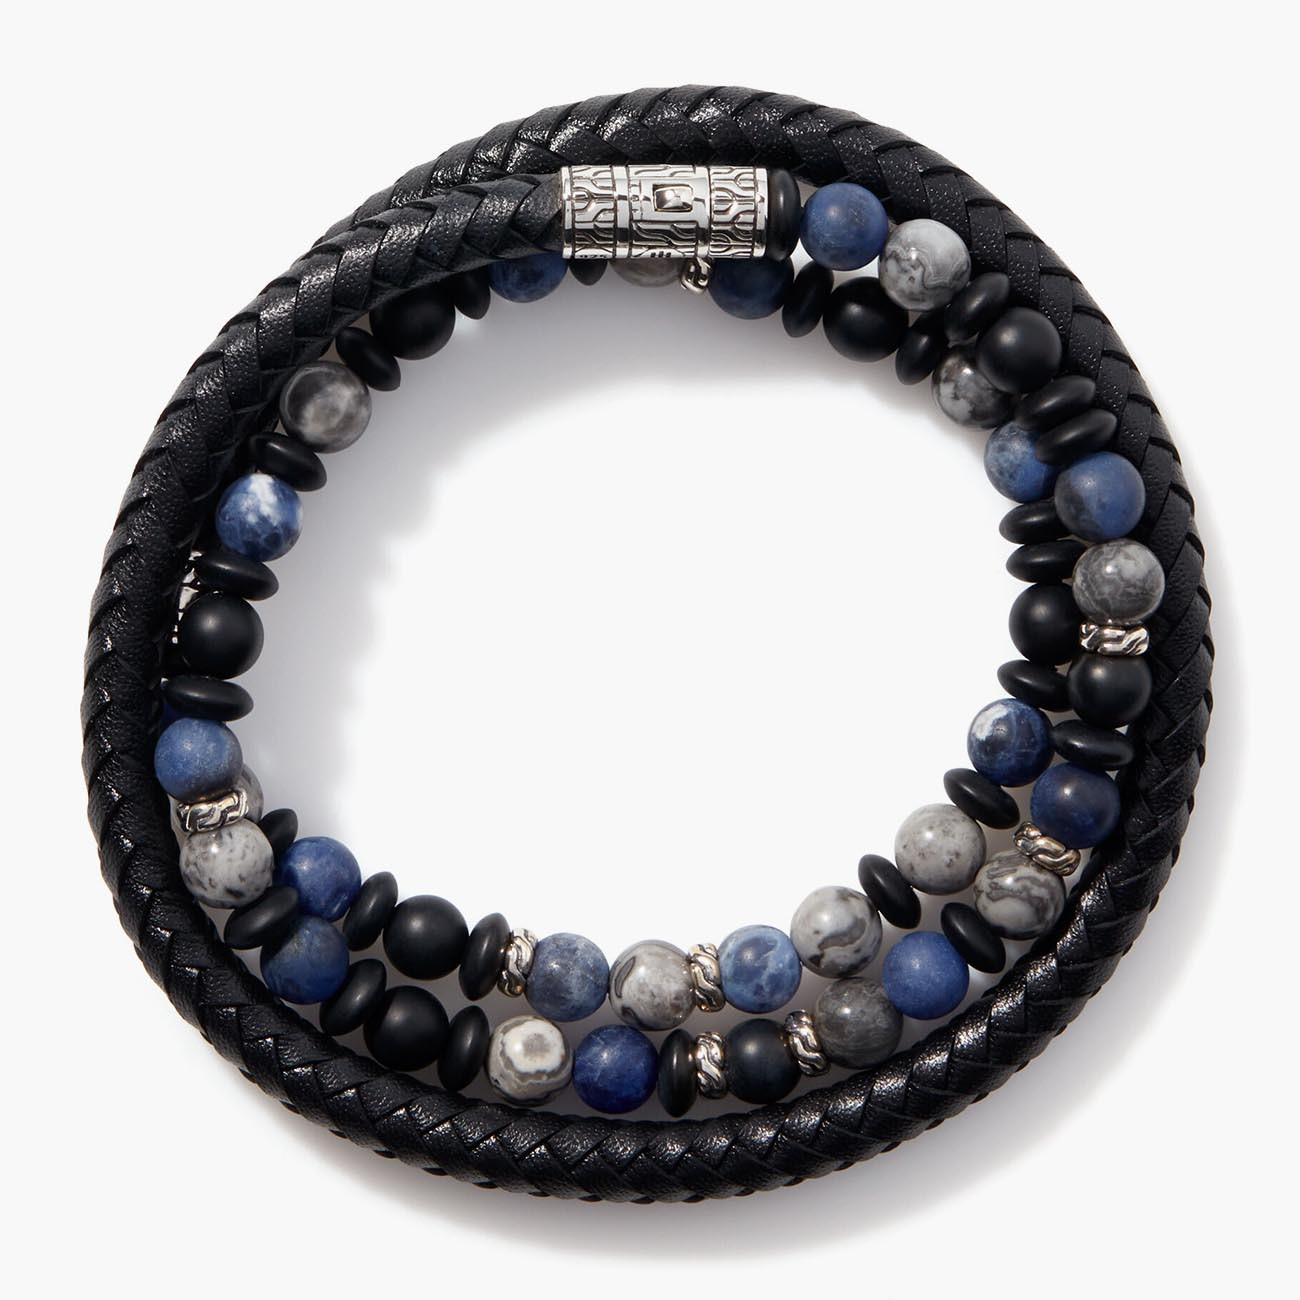 JOHN HARDY Silver, Leather and Beaded Wrap Bracelet for Men